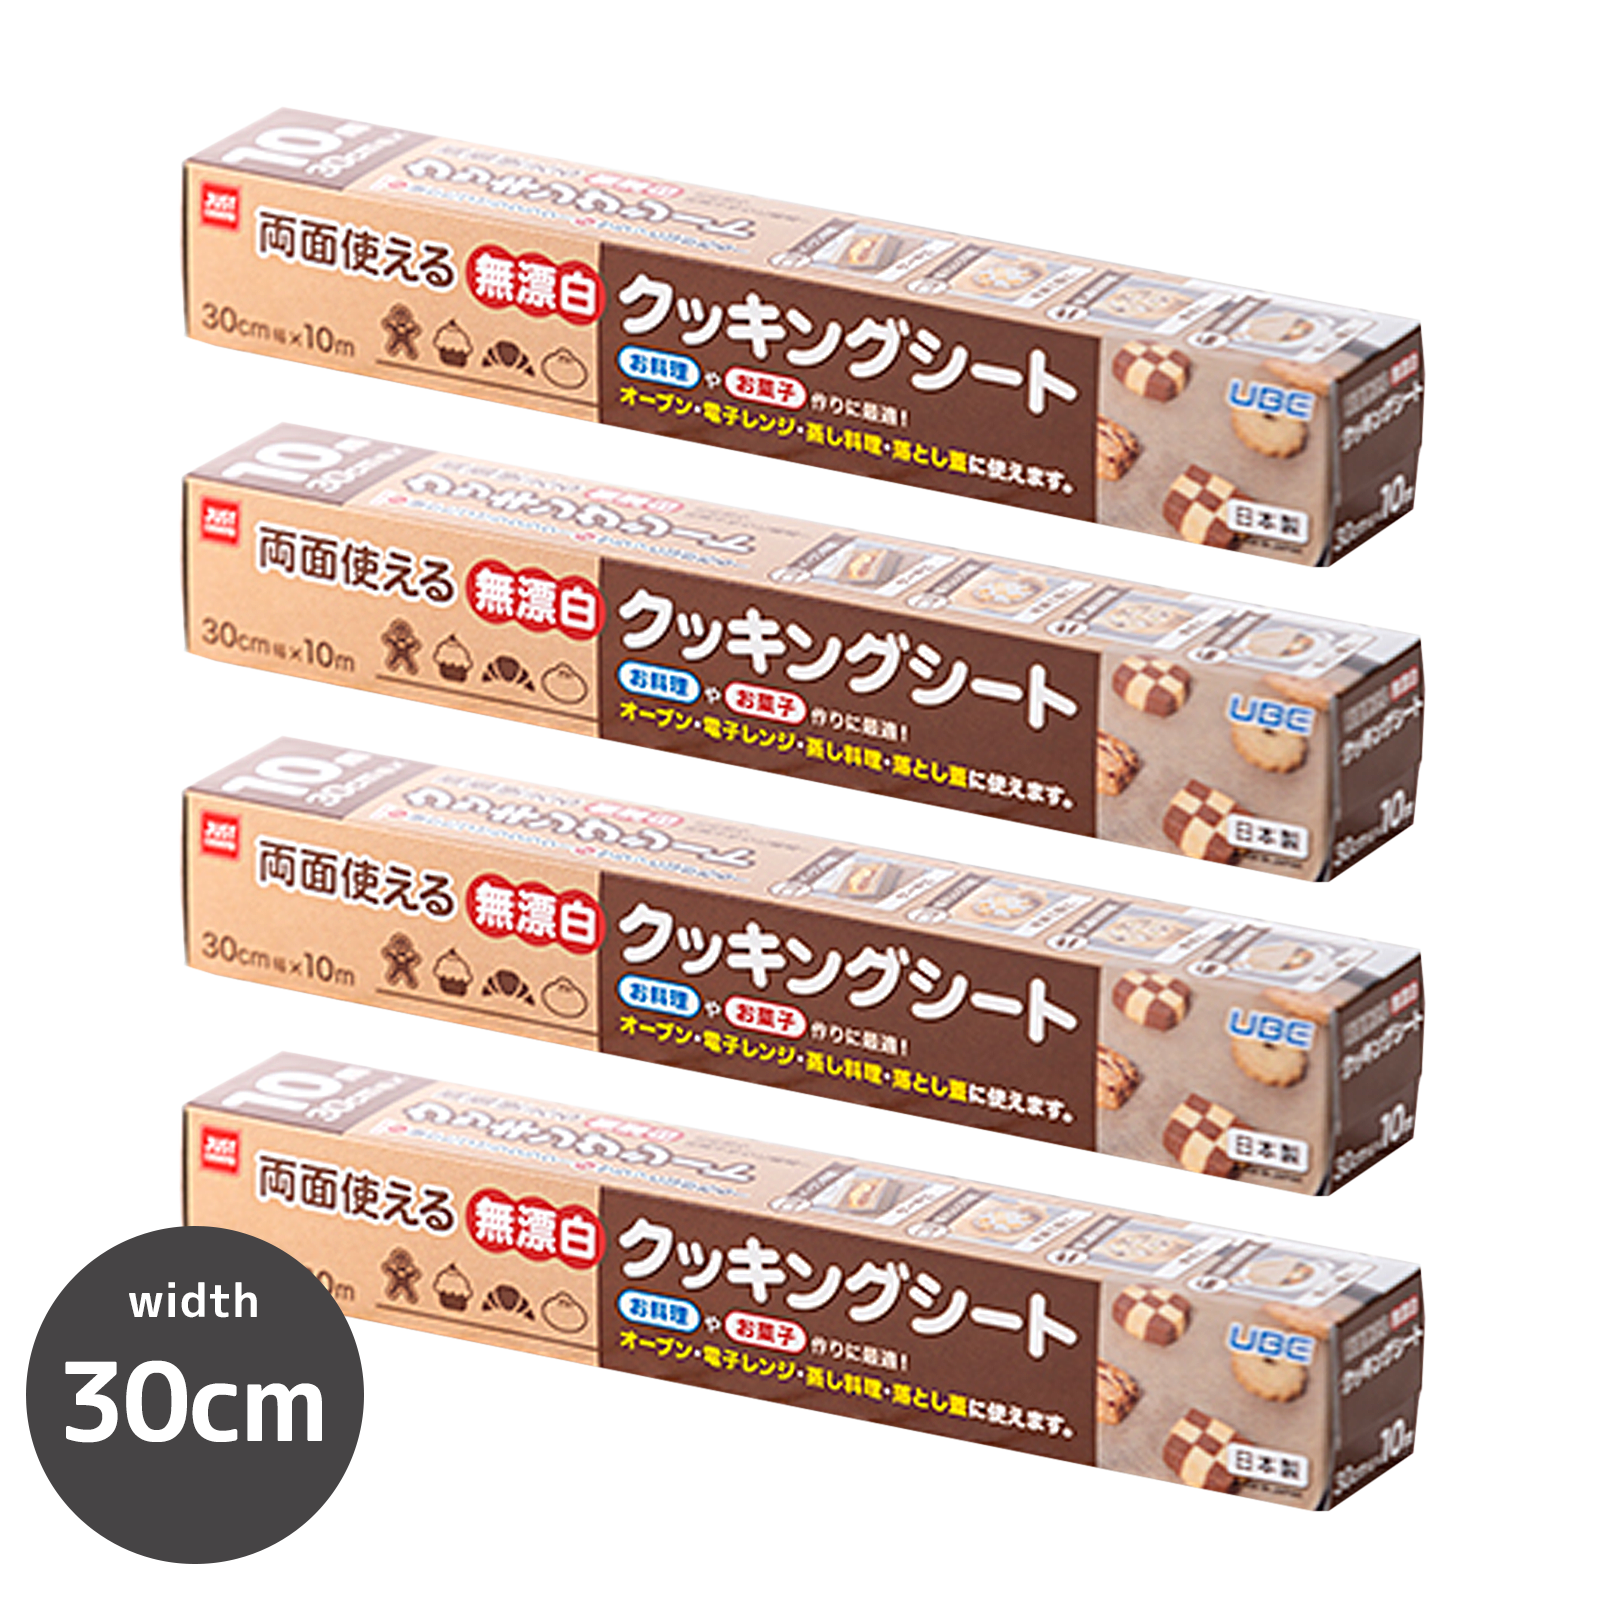 Unbleached Baking / Cooking Paper Rolls from Japan (4-Pack) (30cm) - Horizon Farms